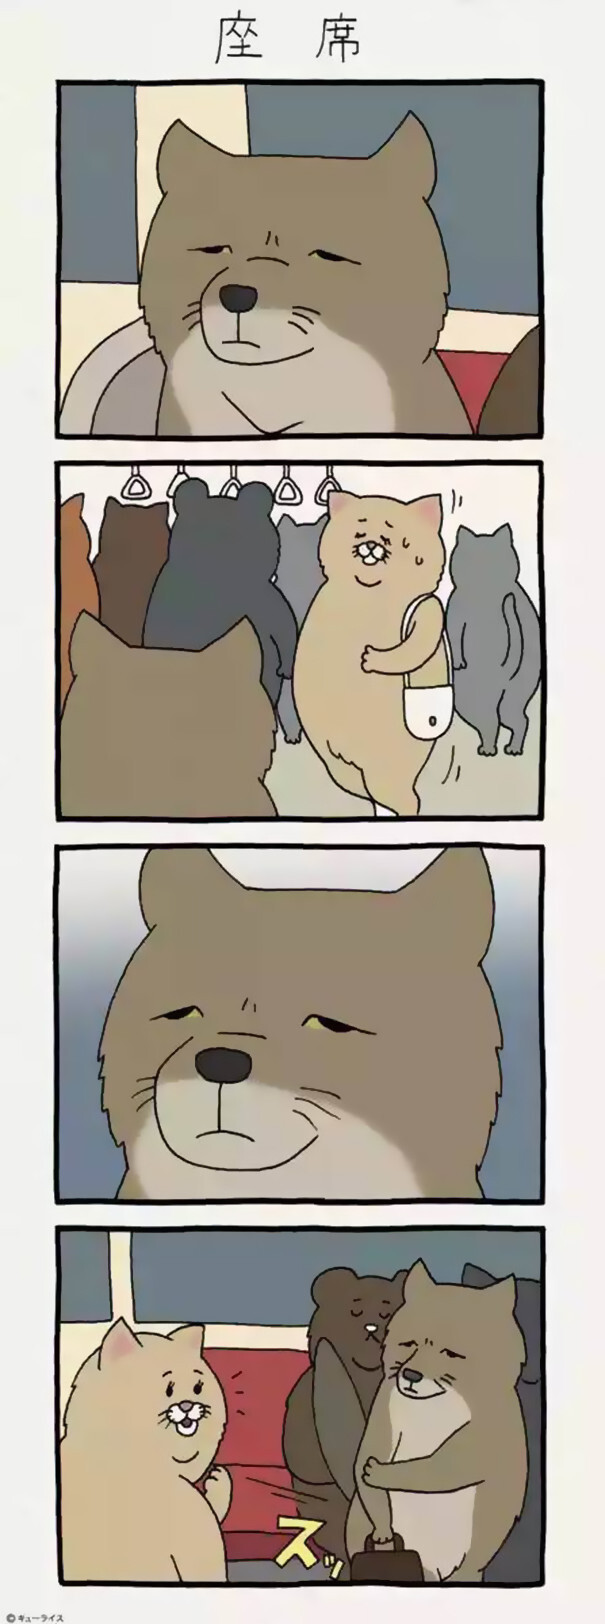 If You’re Feeling Down, These 10+ Good Boy Comics Will Instantly Make You Smile